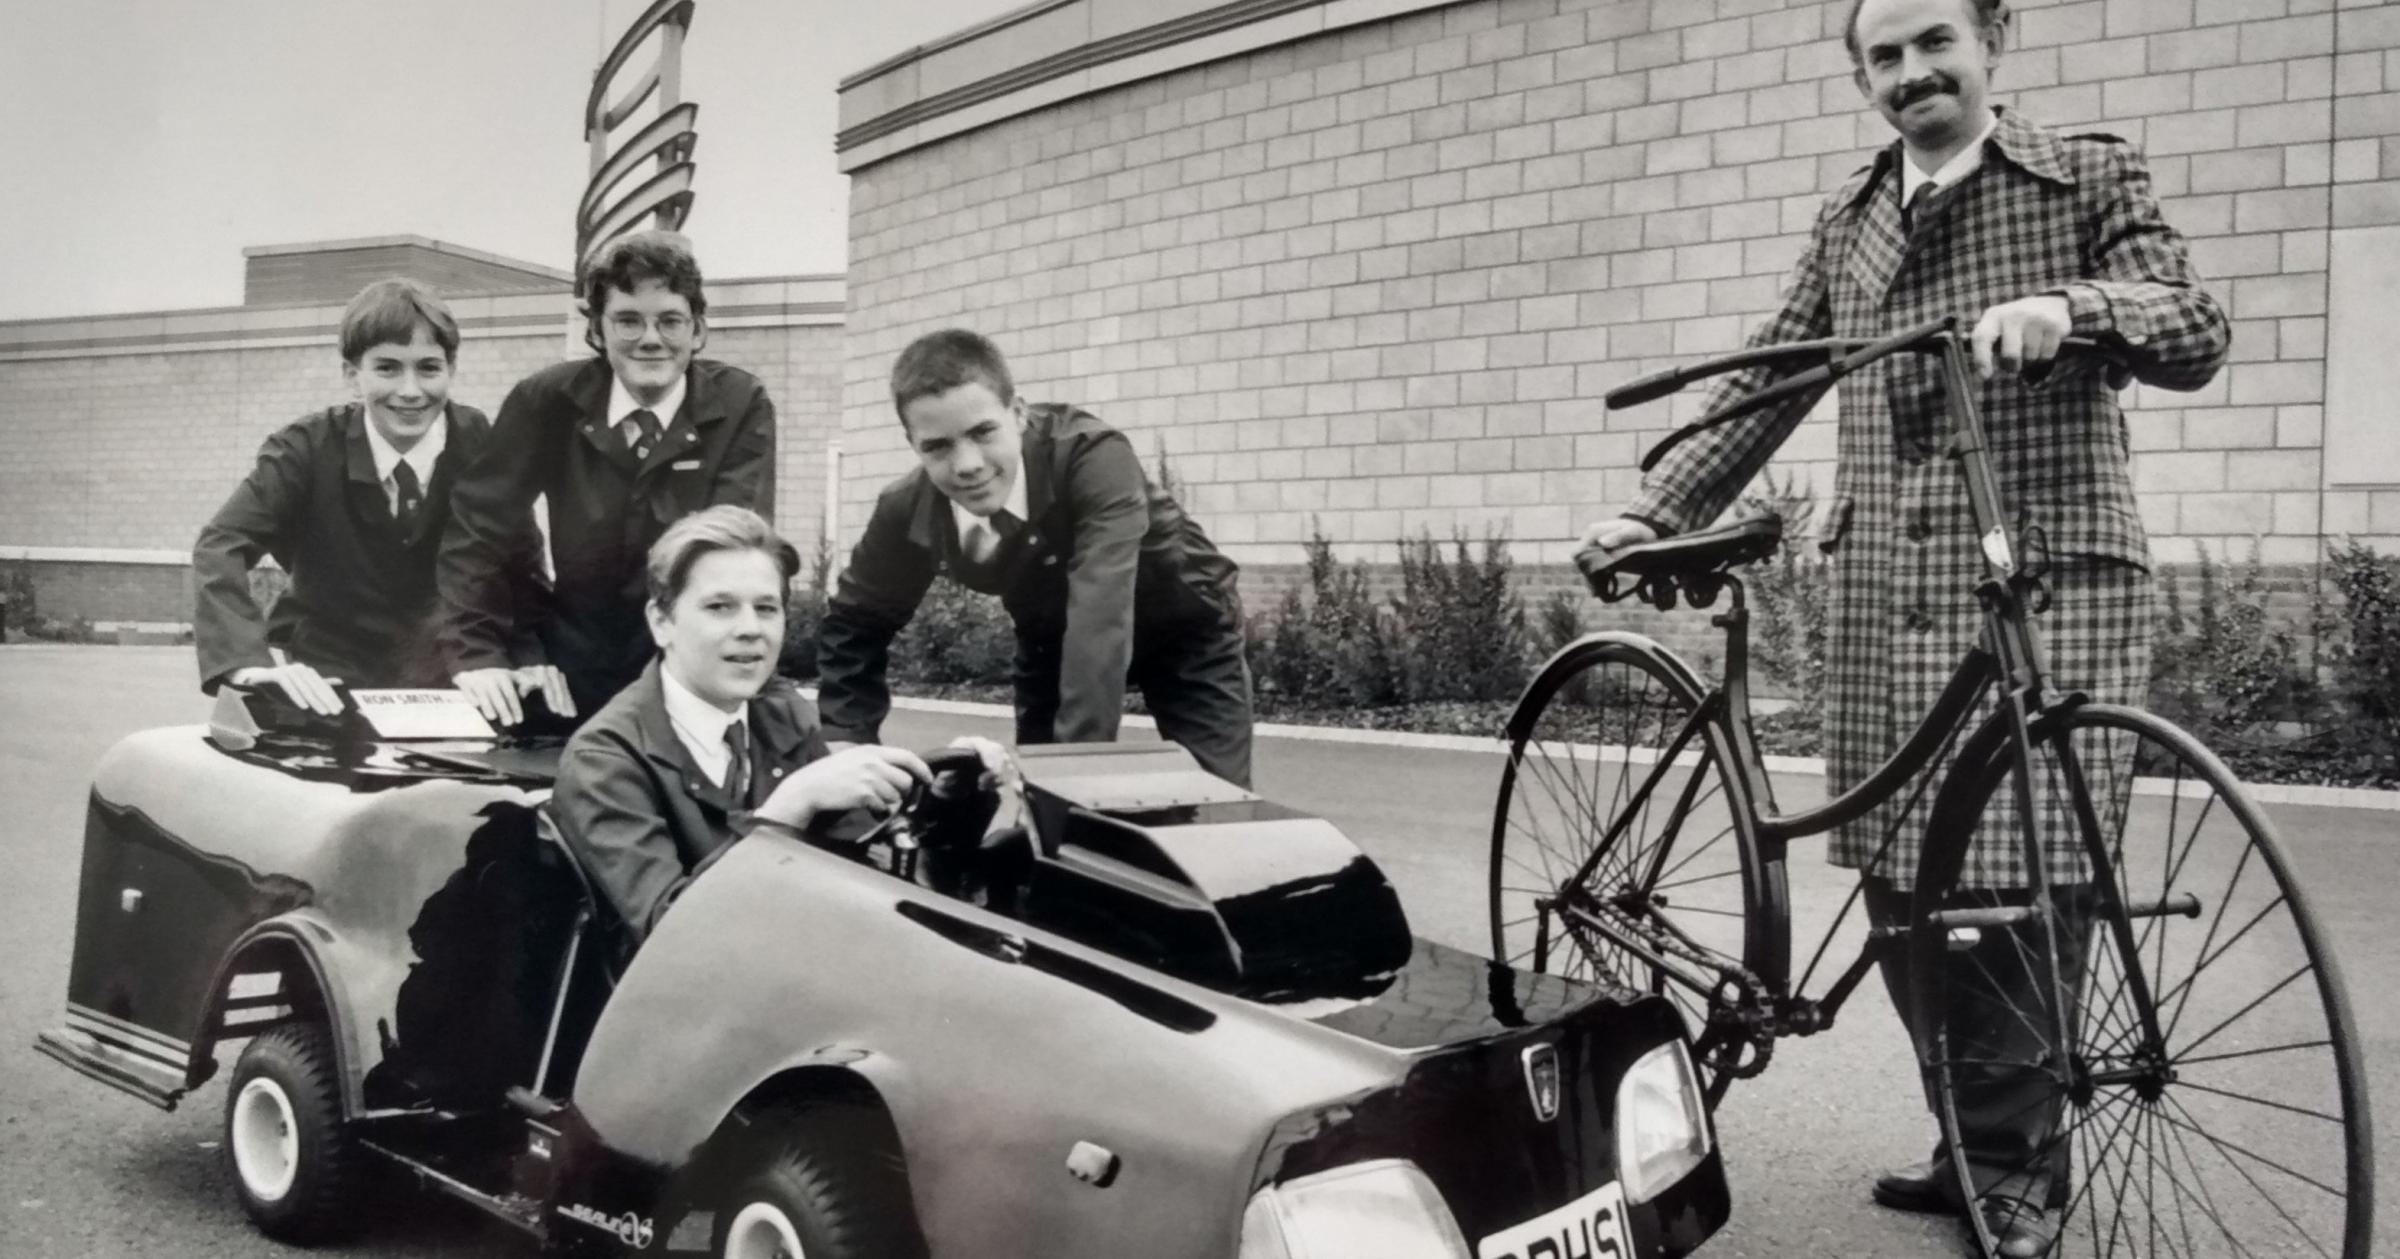 October 1995 and technology teacher Graham Jeeves is ready to pit pedal power against award-winning kart enthusiasts Edward Steelfox, Joseph Jeffrey, Blake Prime and Jameson Lane. The boys won a prize at the Rover Career Challenge event